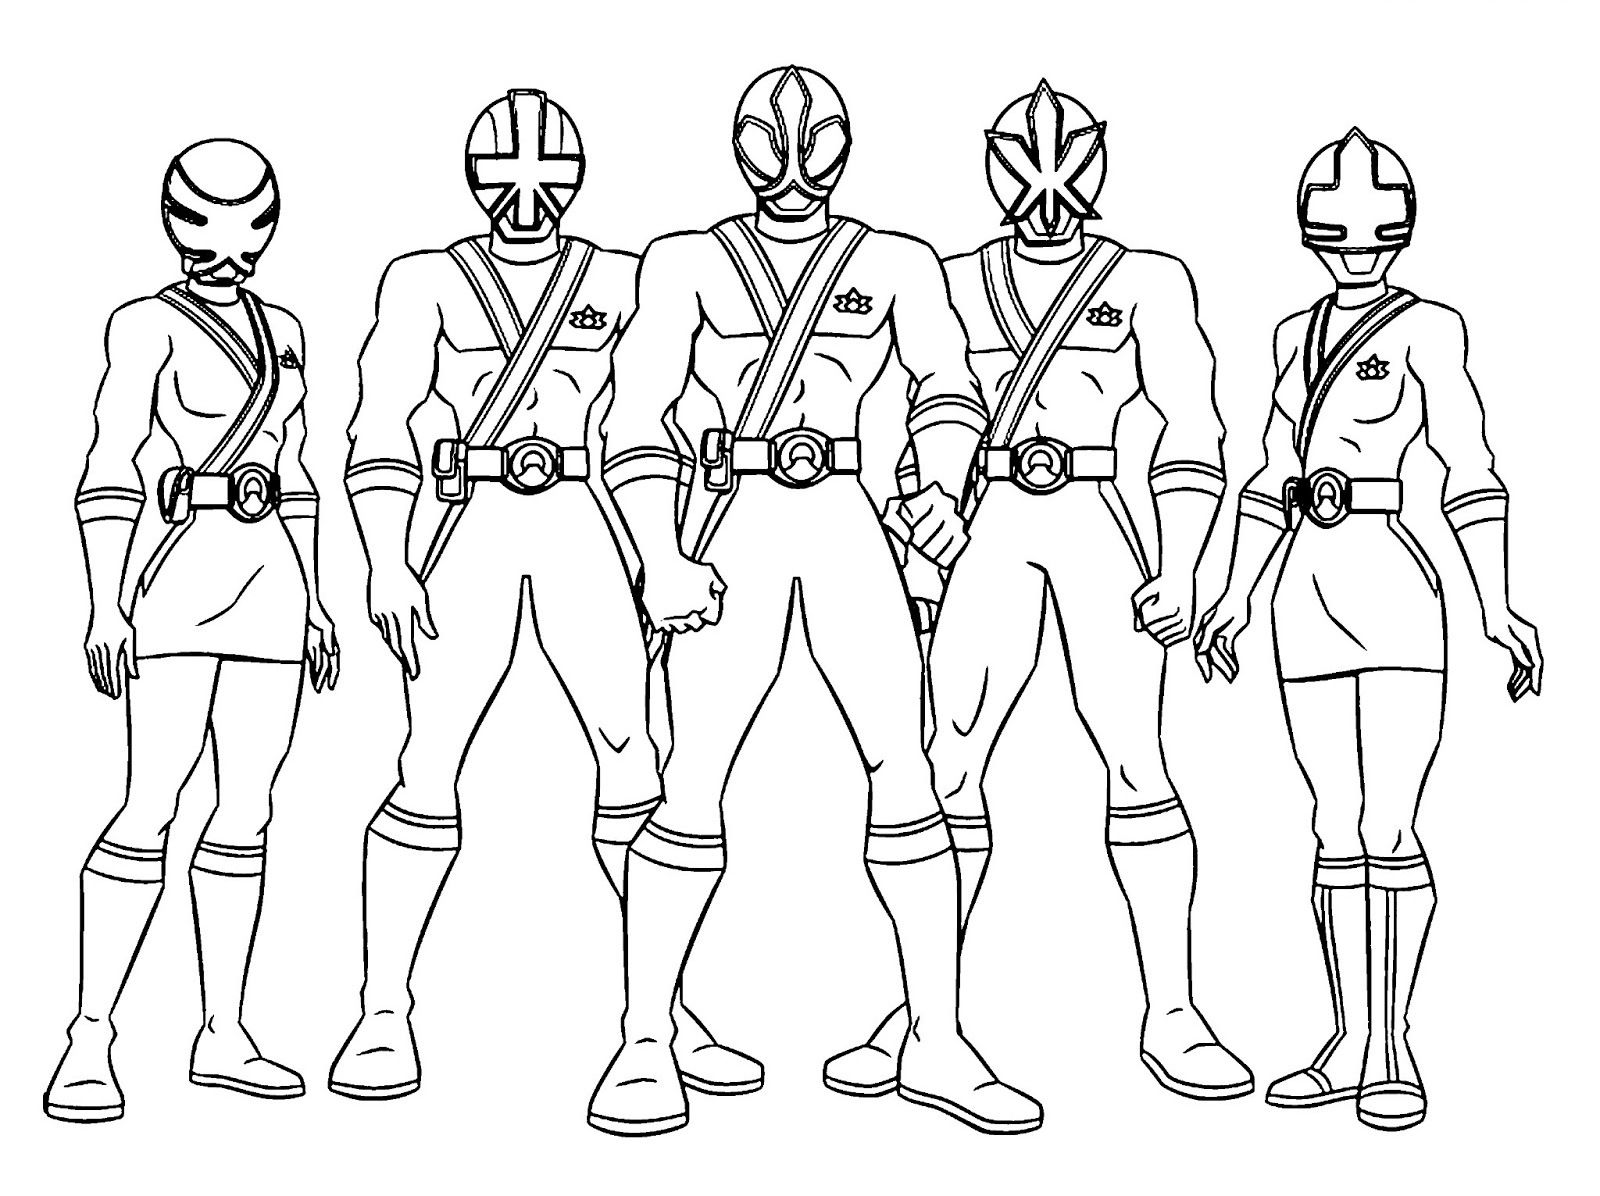 Power Rangers Squad Coloring Page - Free Printable Coloring Pages for Kids